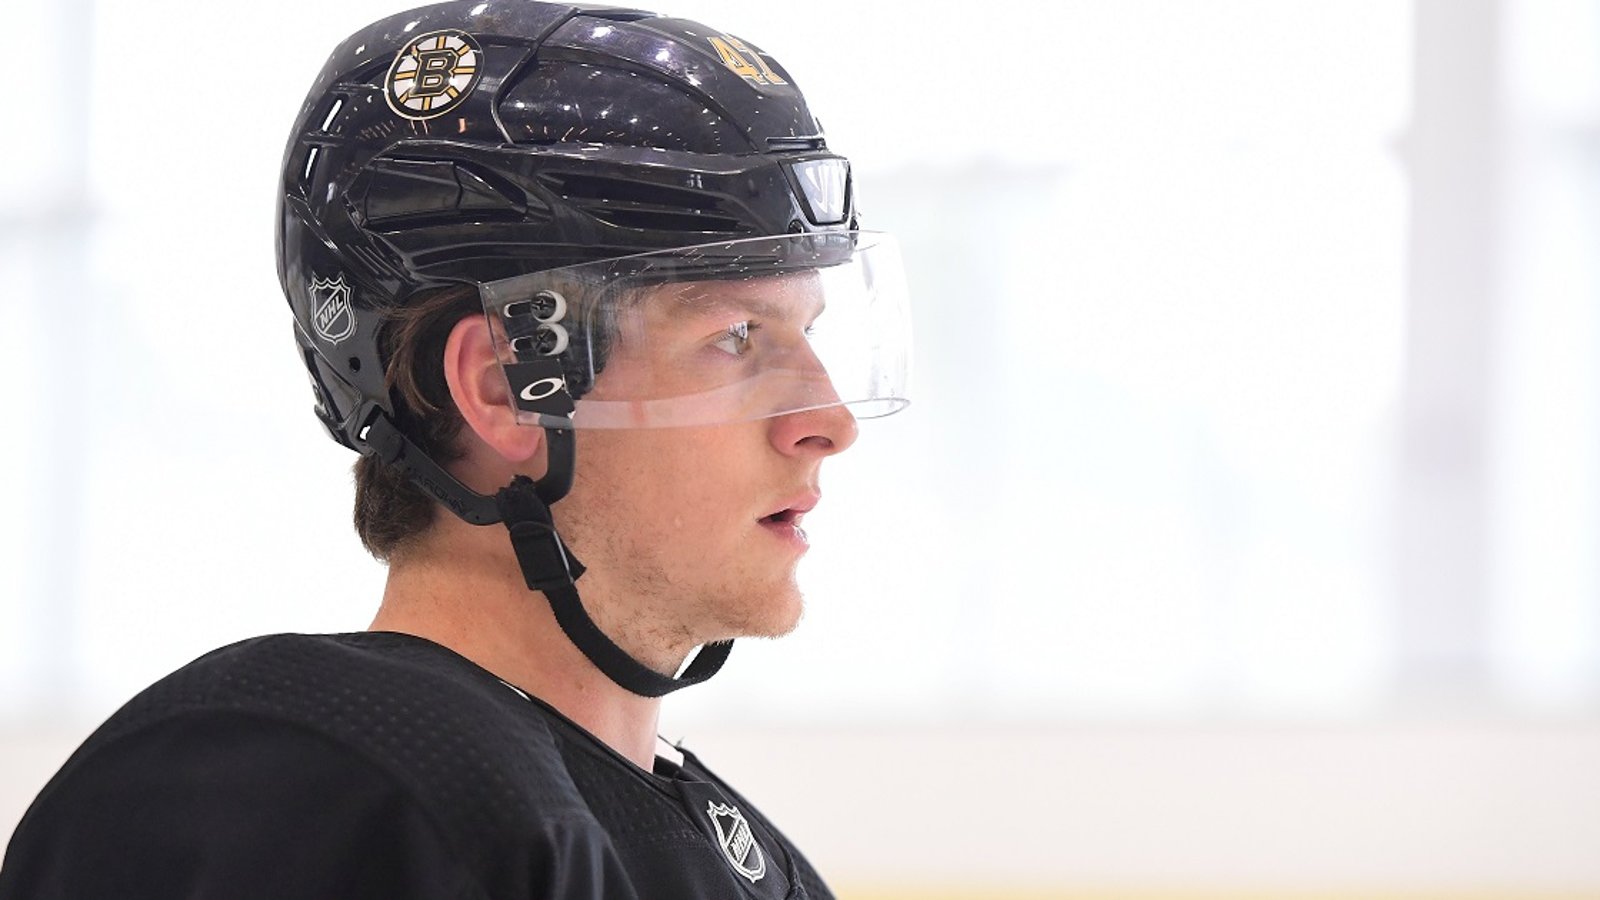 Bruins place Krug on injured reserve, confirm he will miss significant time.